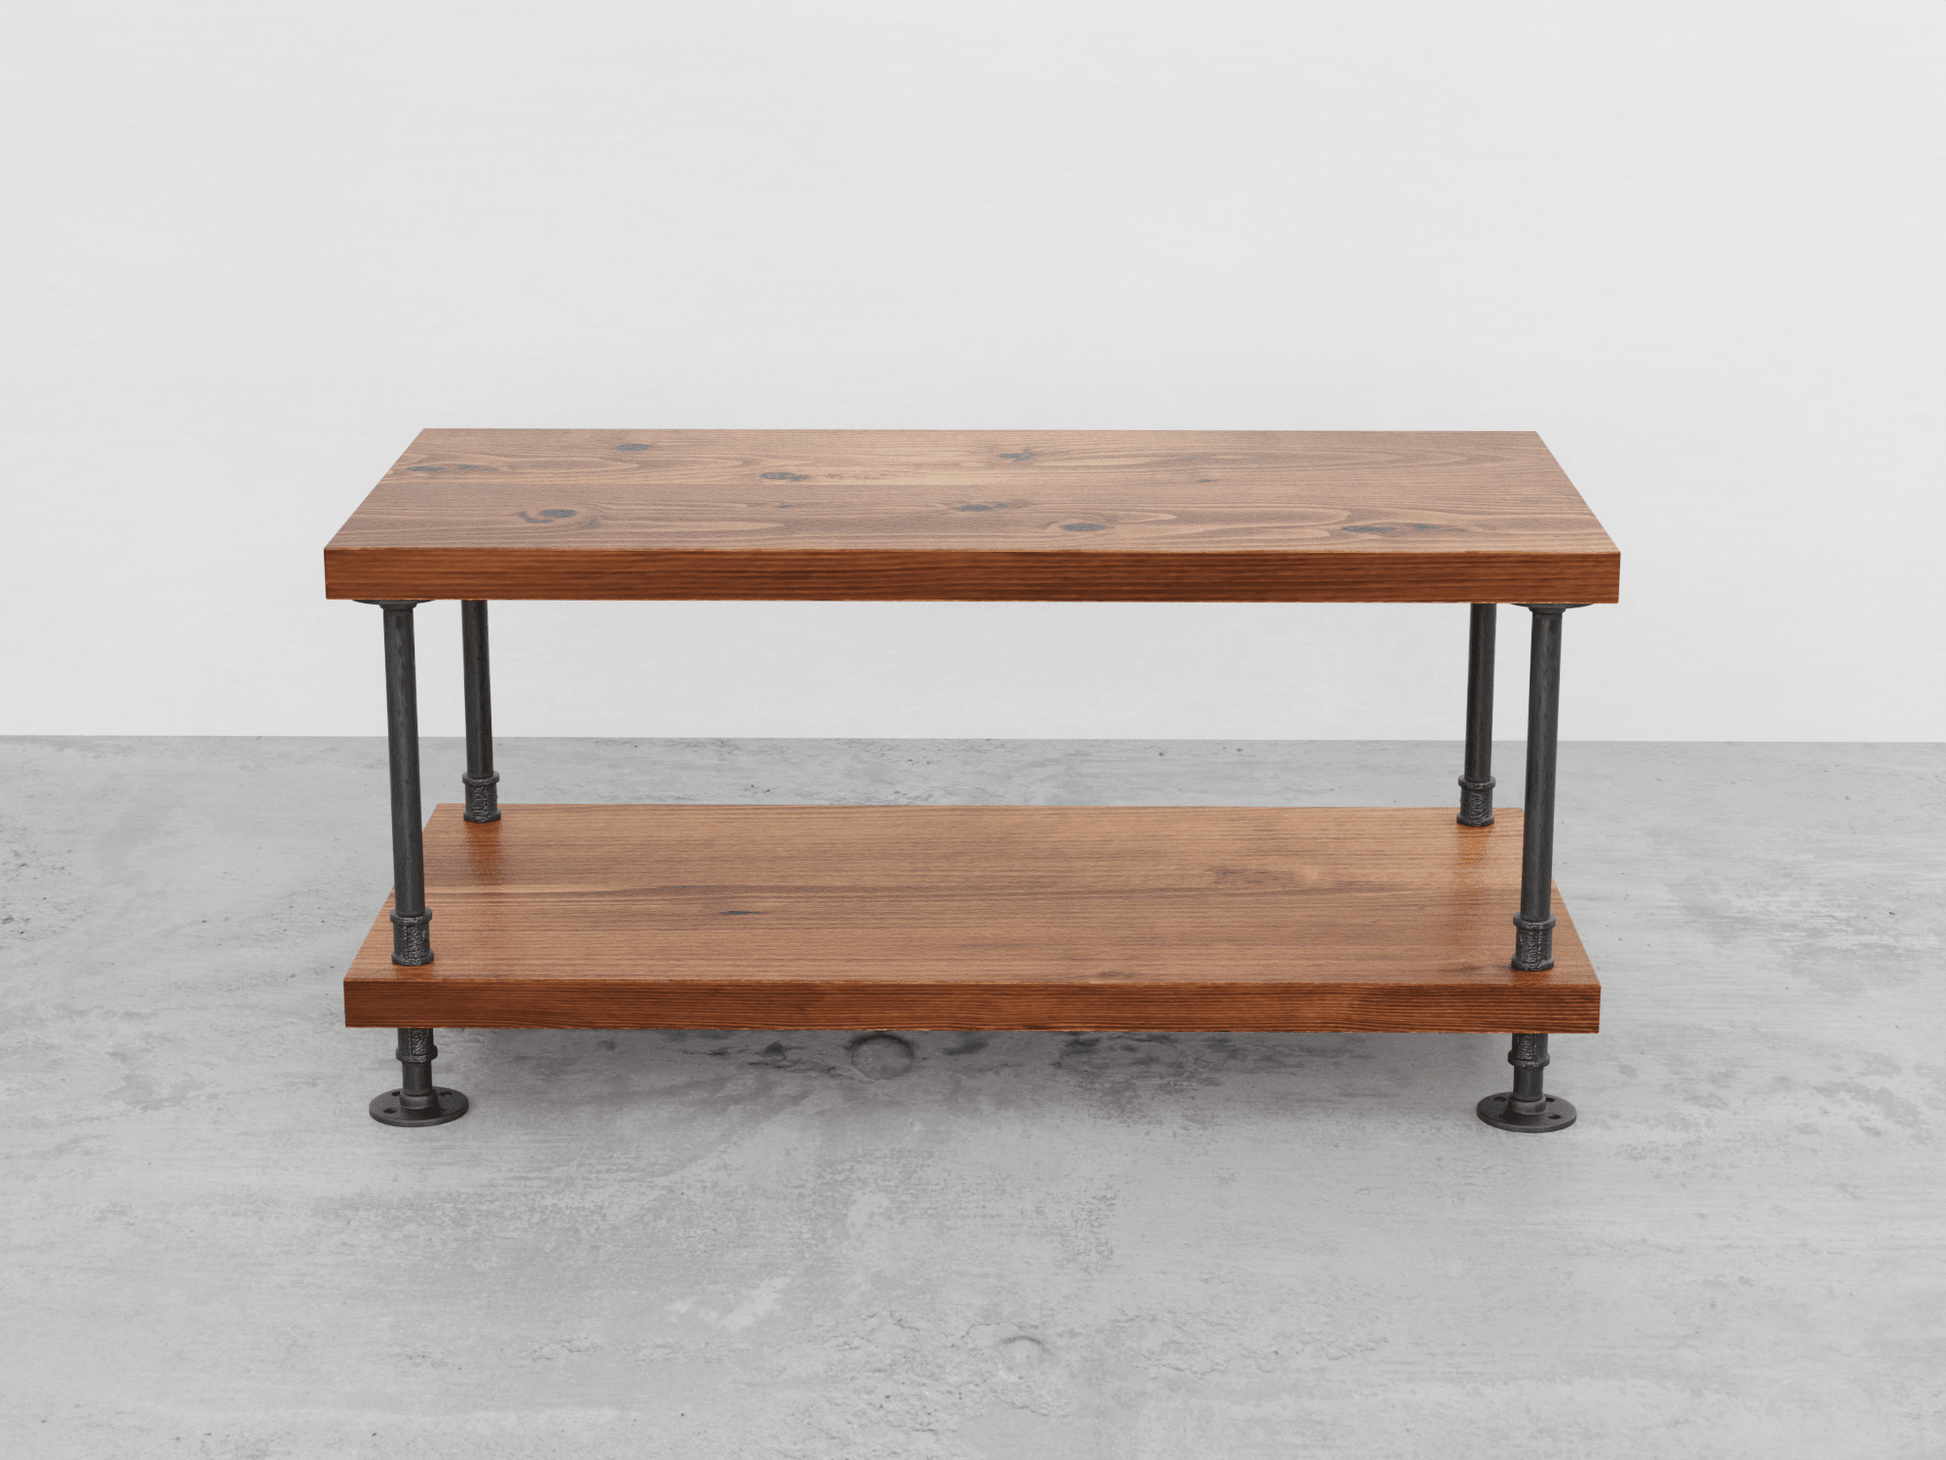 Industrial Pipe and Wood Coffee Table - Woodartdeal